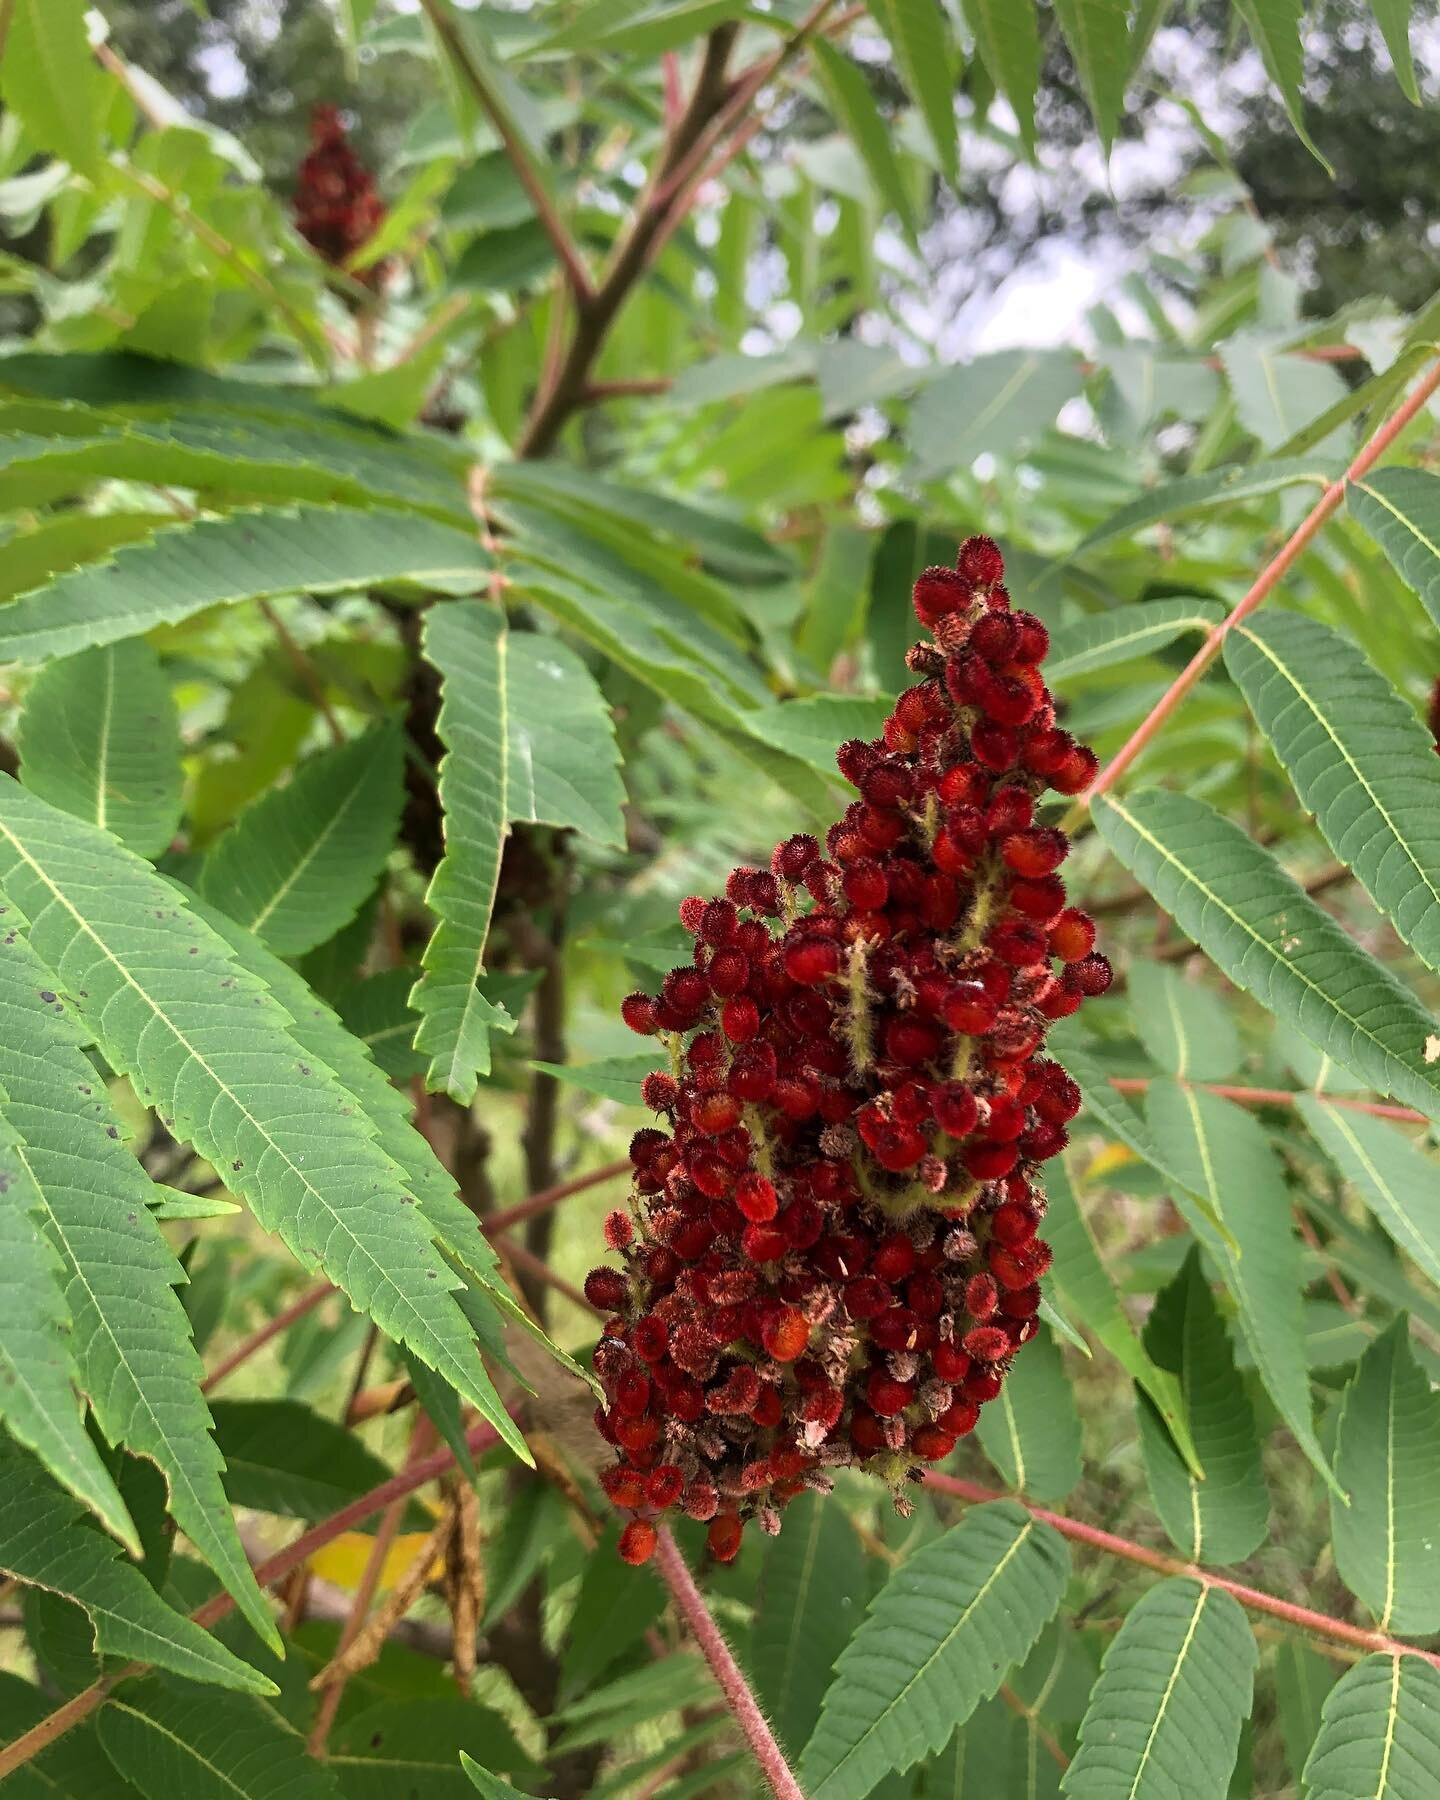 Rhus glabra (sumac) leaf is a great bladder astringent that can help with mild urinary stress incontinence. As for the flower, it&rsquo;s a colorful garnish that provides a touch of citrus acidity to your meats, salads, breads, and so forth.

#incont